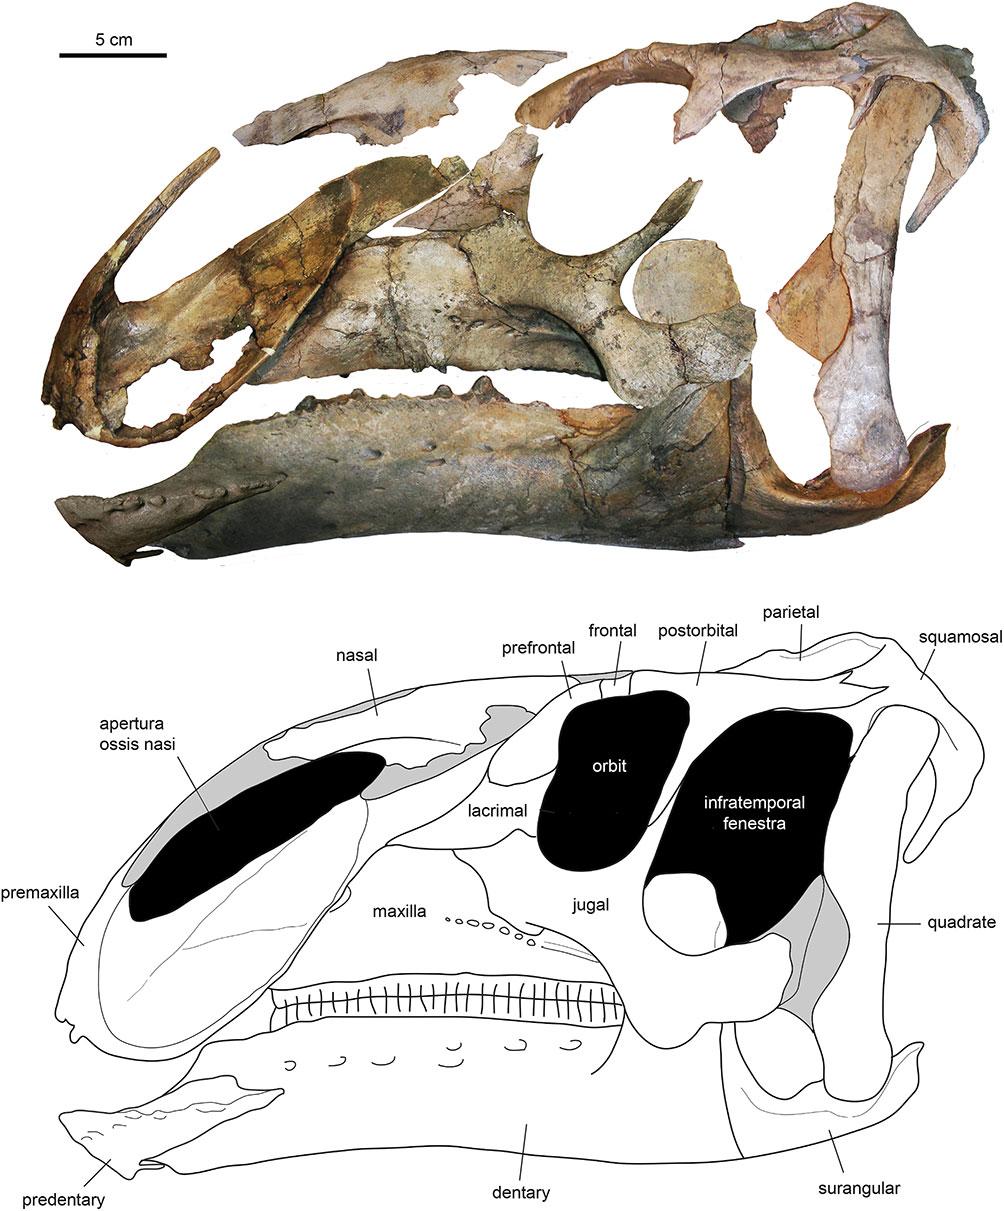 Figure 3 Assembled holotype skull of Eotrachodon orientalis, MSC 7949, in left lateral view. The mandible and nasal bone have been reversed to match the orientation of the other elements.